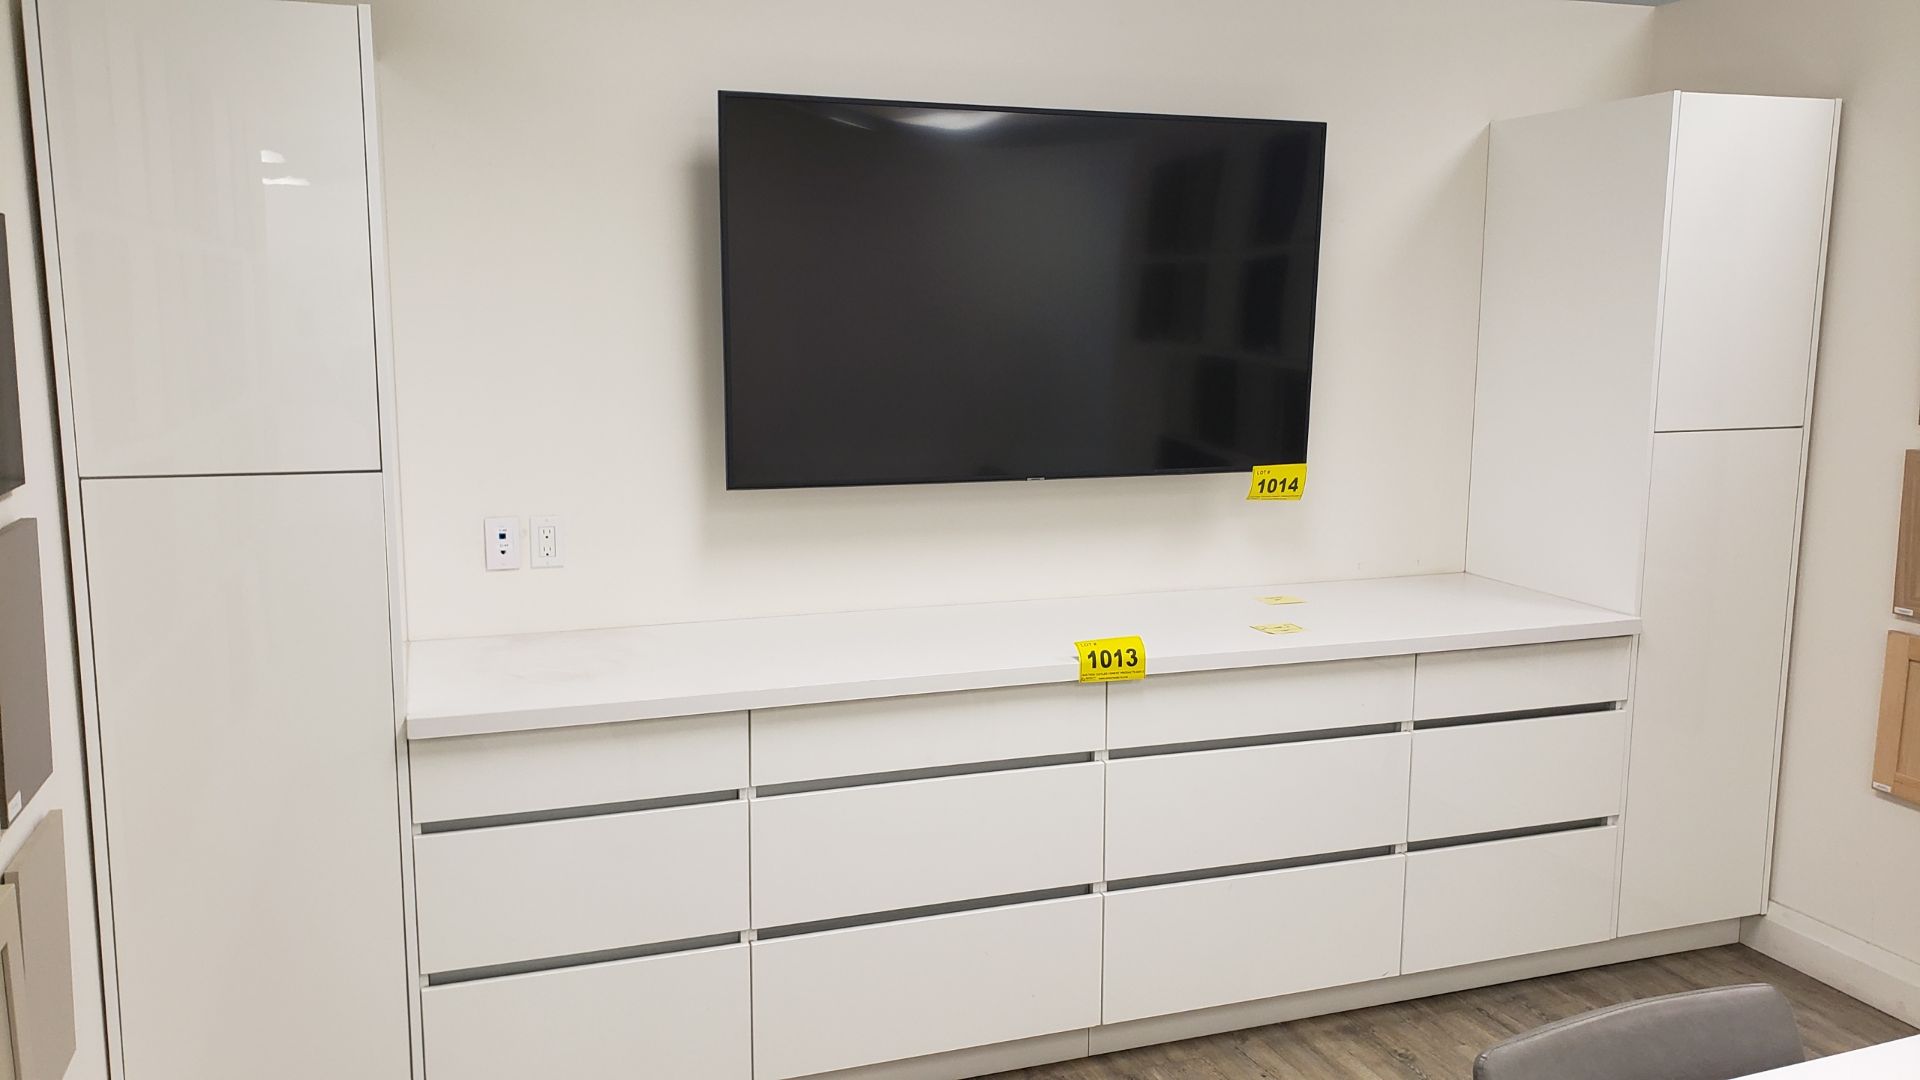 SHOWROOM DISPLAY ENTERTAINMENT UNIT, 147"L OVERALL, 108"L BETWEEN CABINETS, 84"W W/ CABINETRY